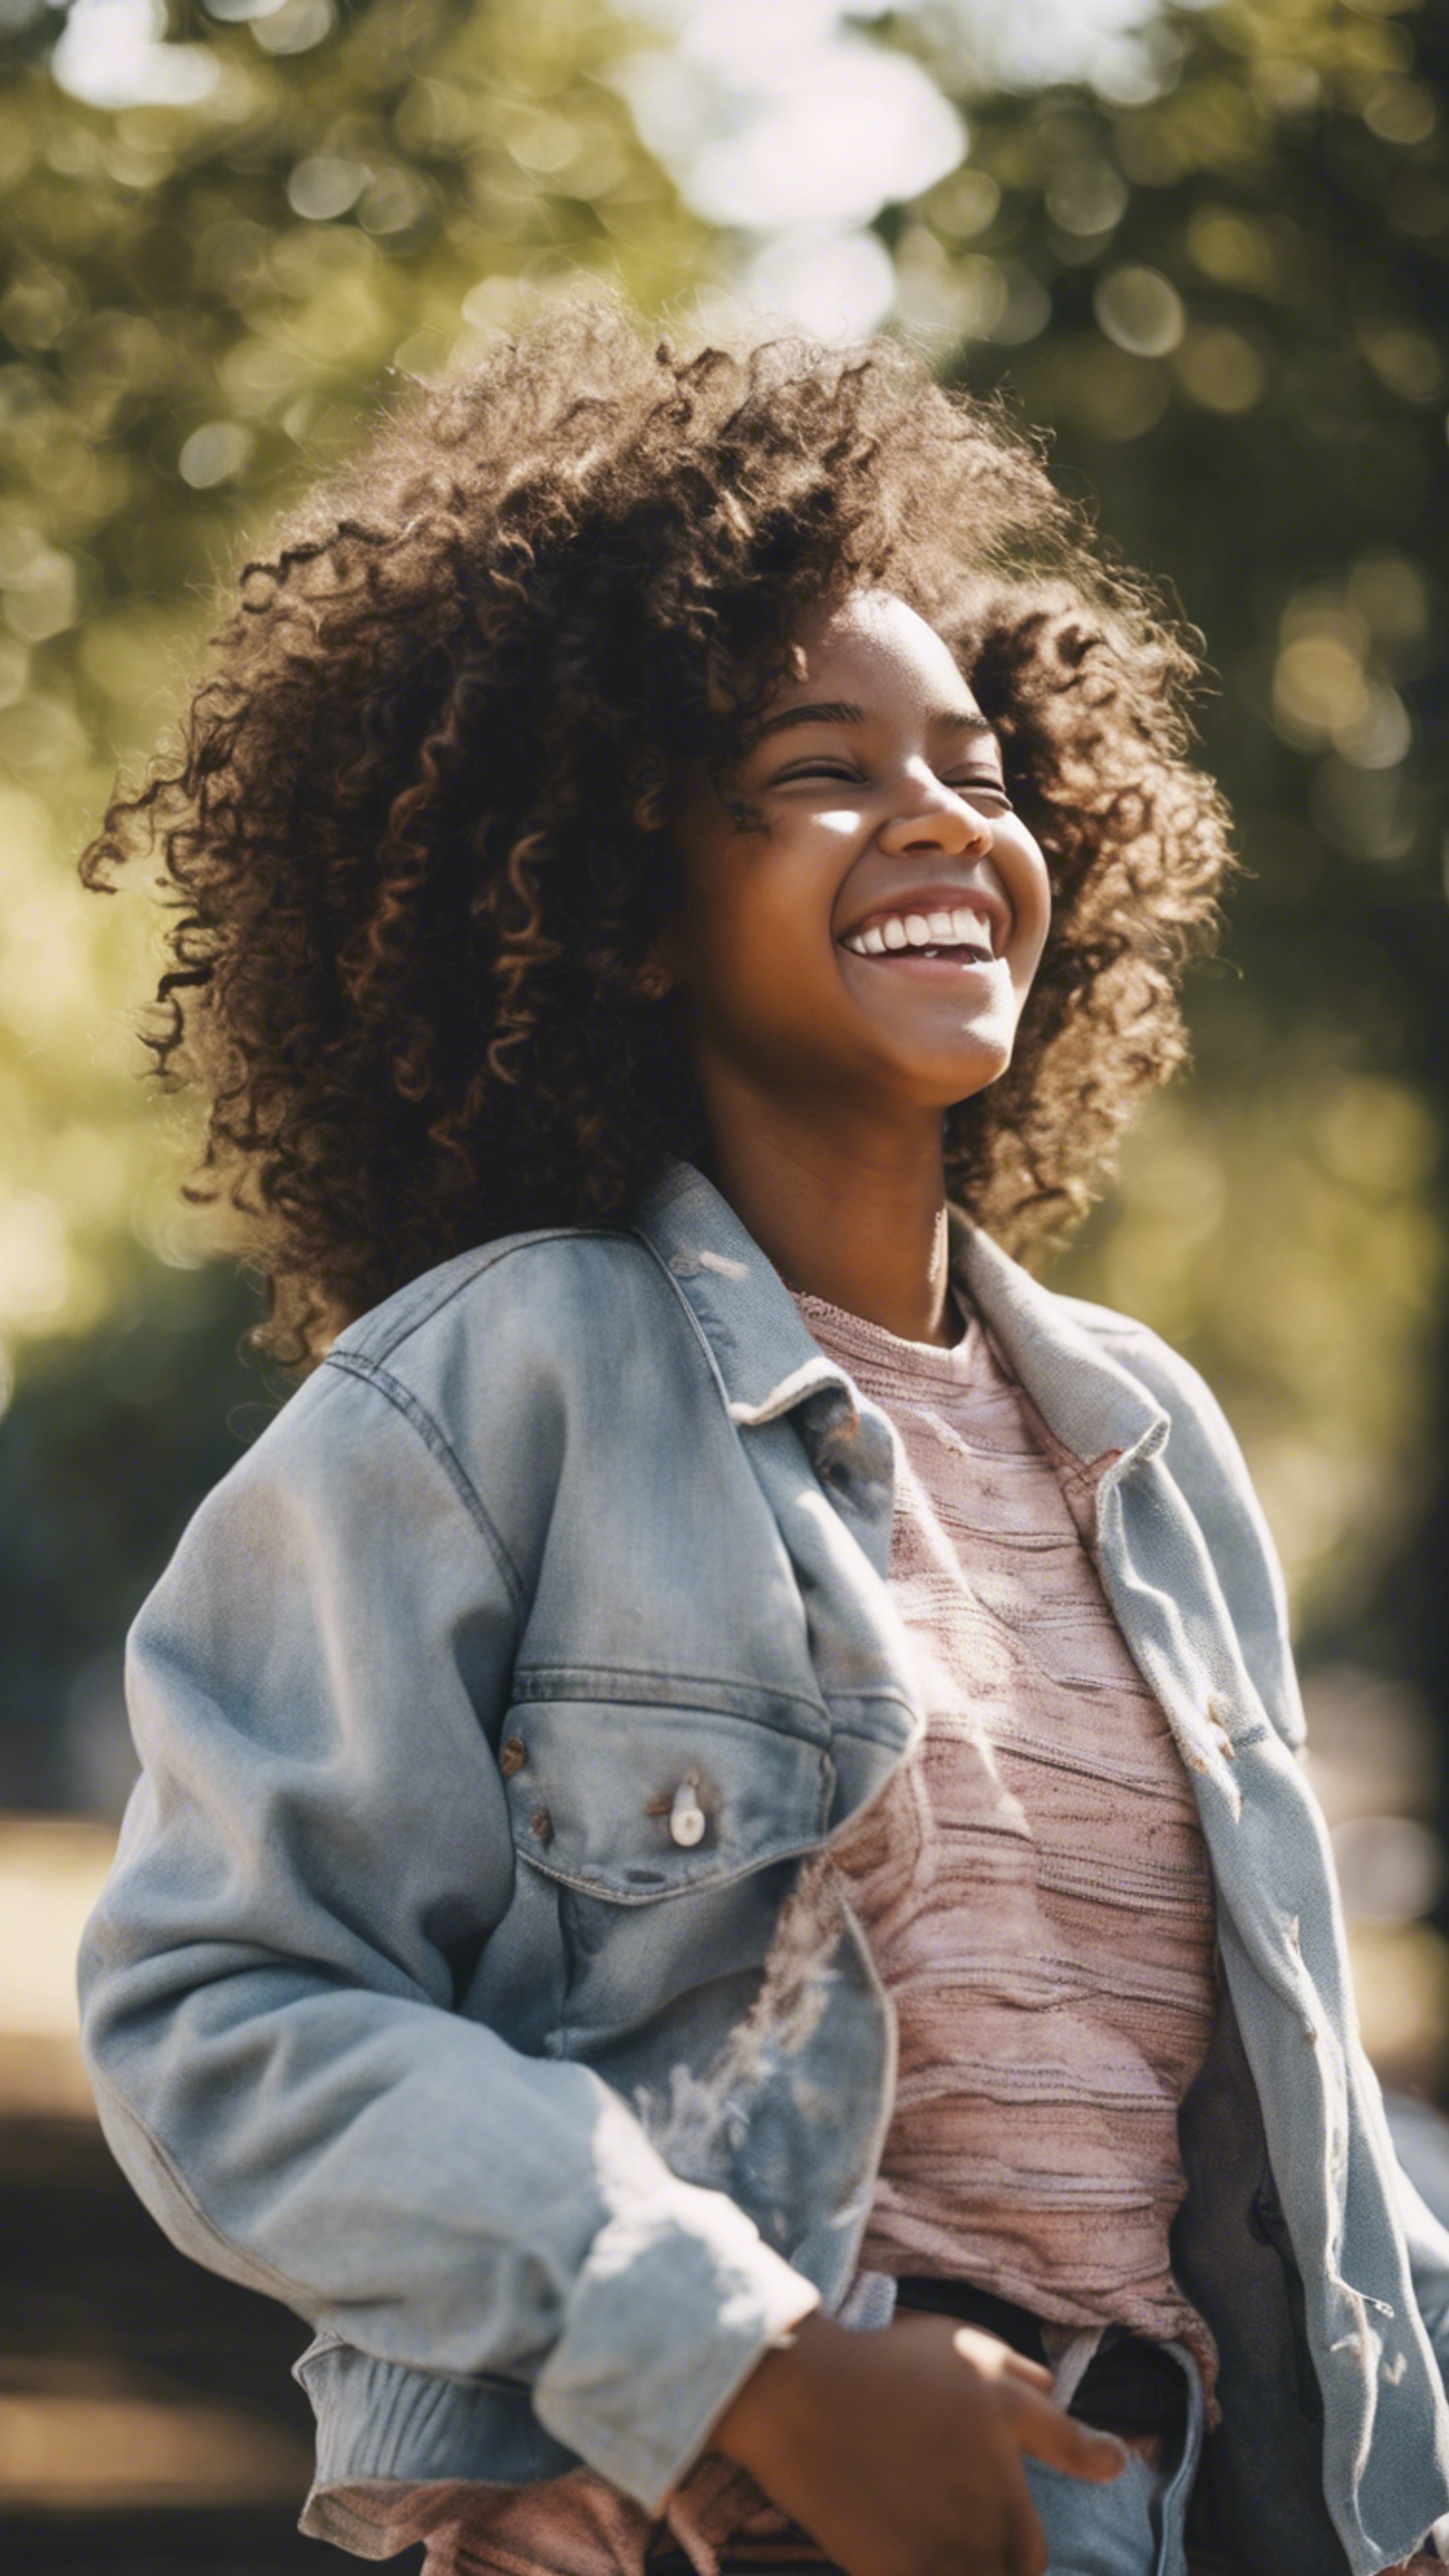 A confident young black girl with big, curly hair laughing while playing in a city park during a sunny afternoon. Tapeta[a9bacc30abb04d56bfae]